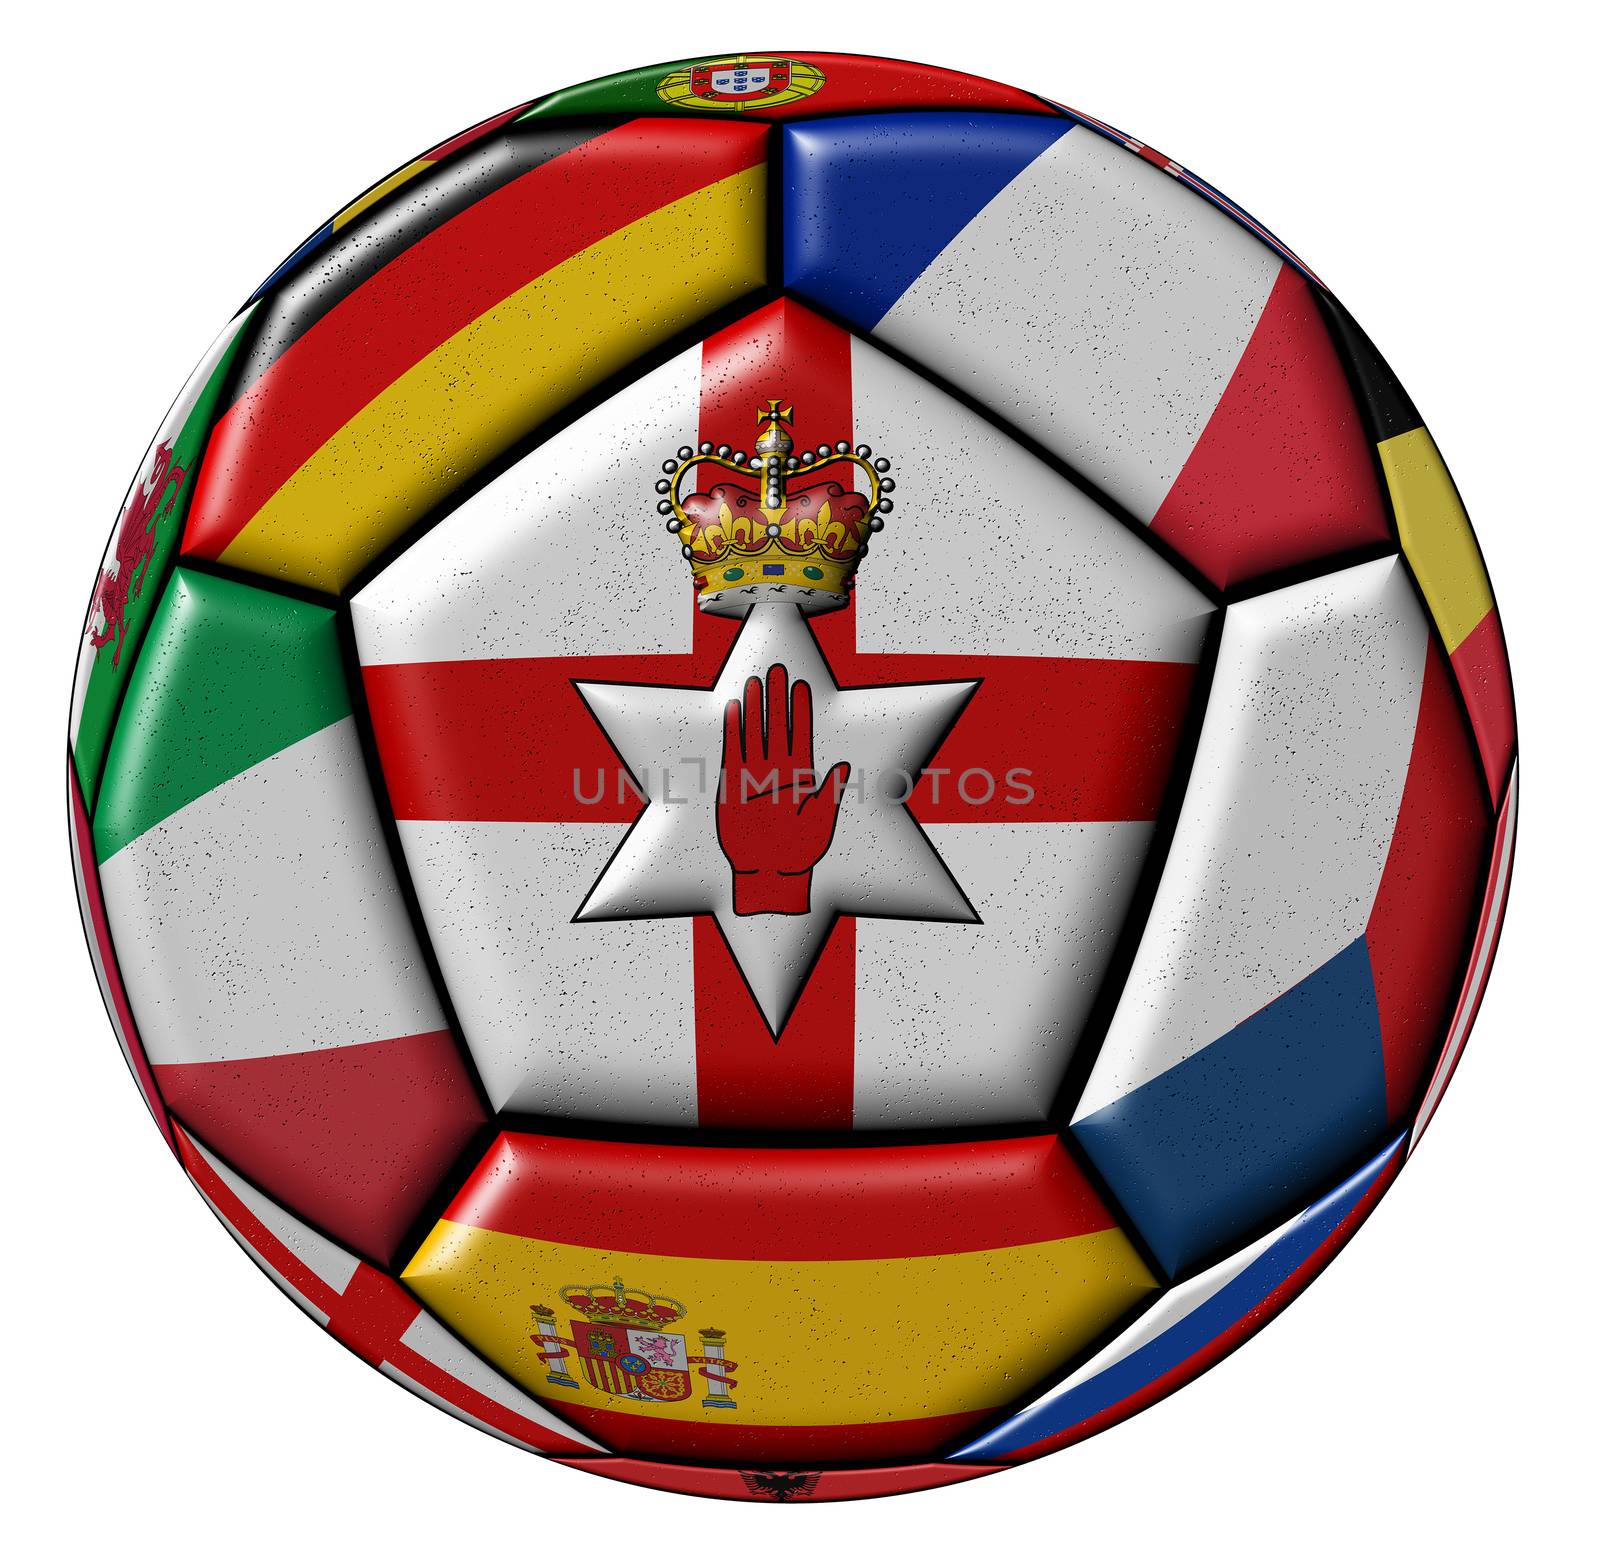 Soccer ball on a white background with flags of European countries - flag of Ireland in the center